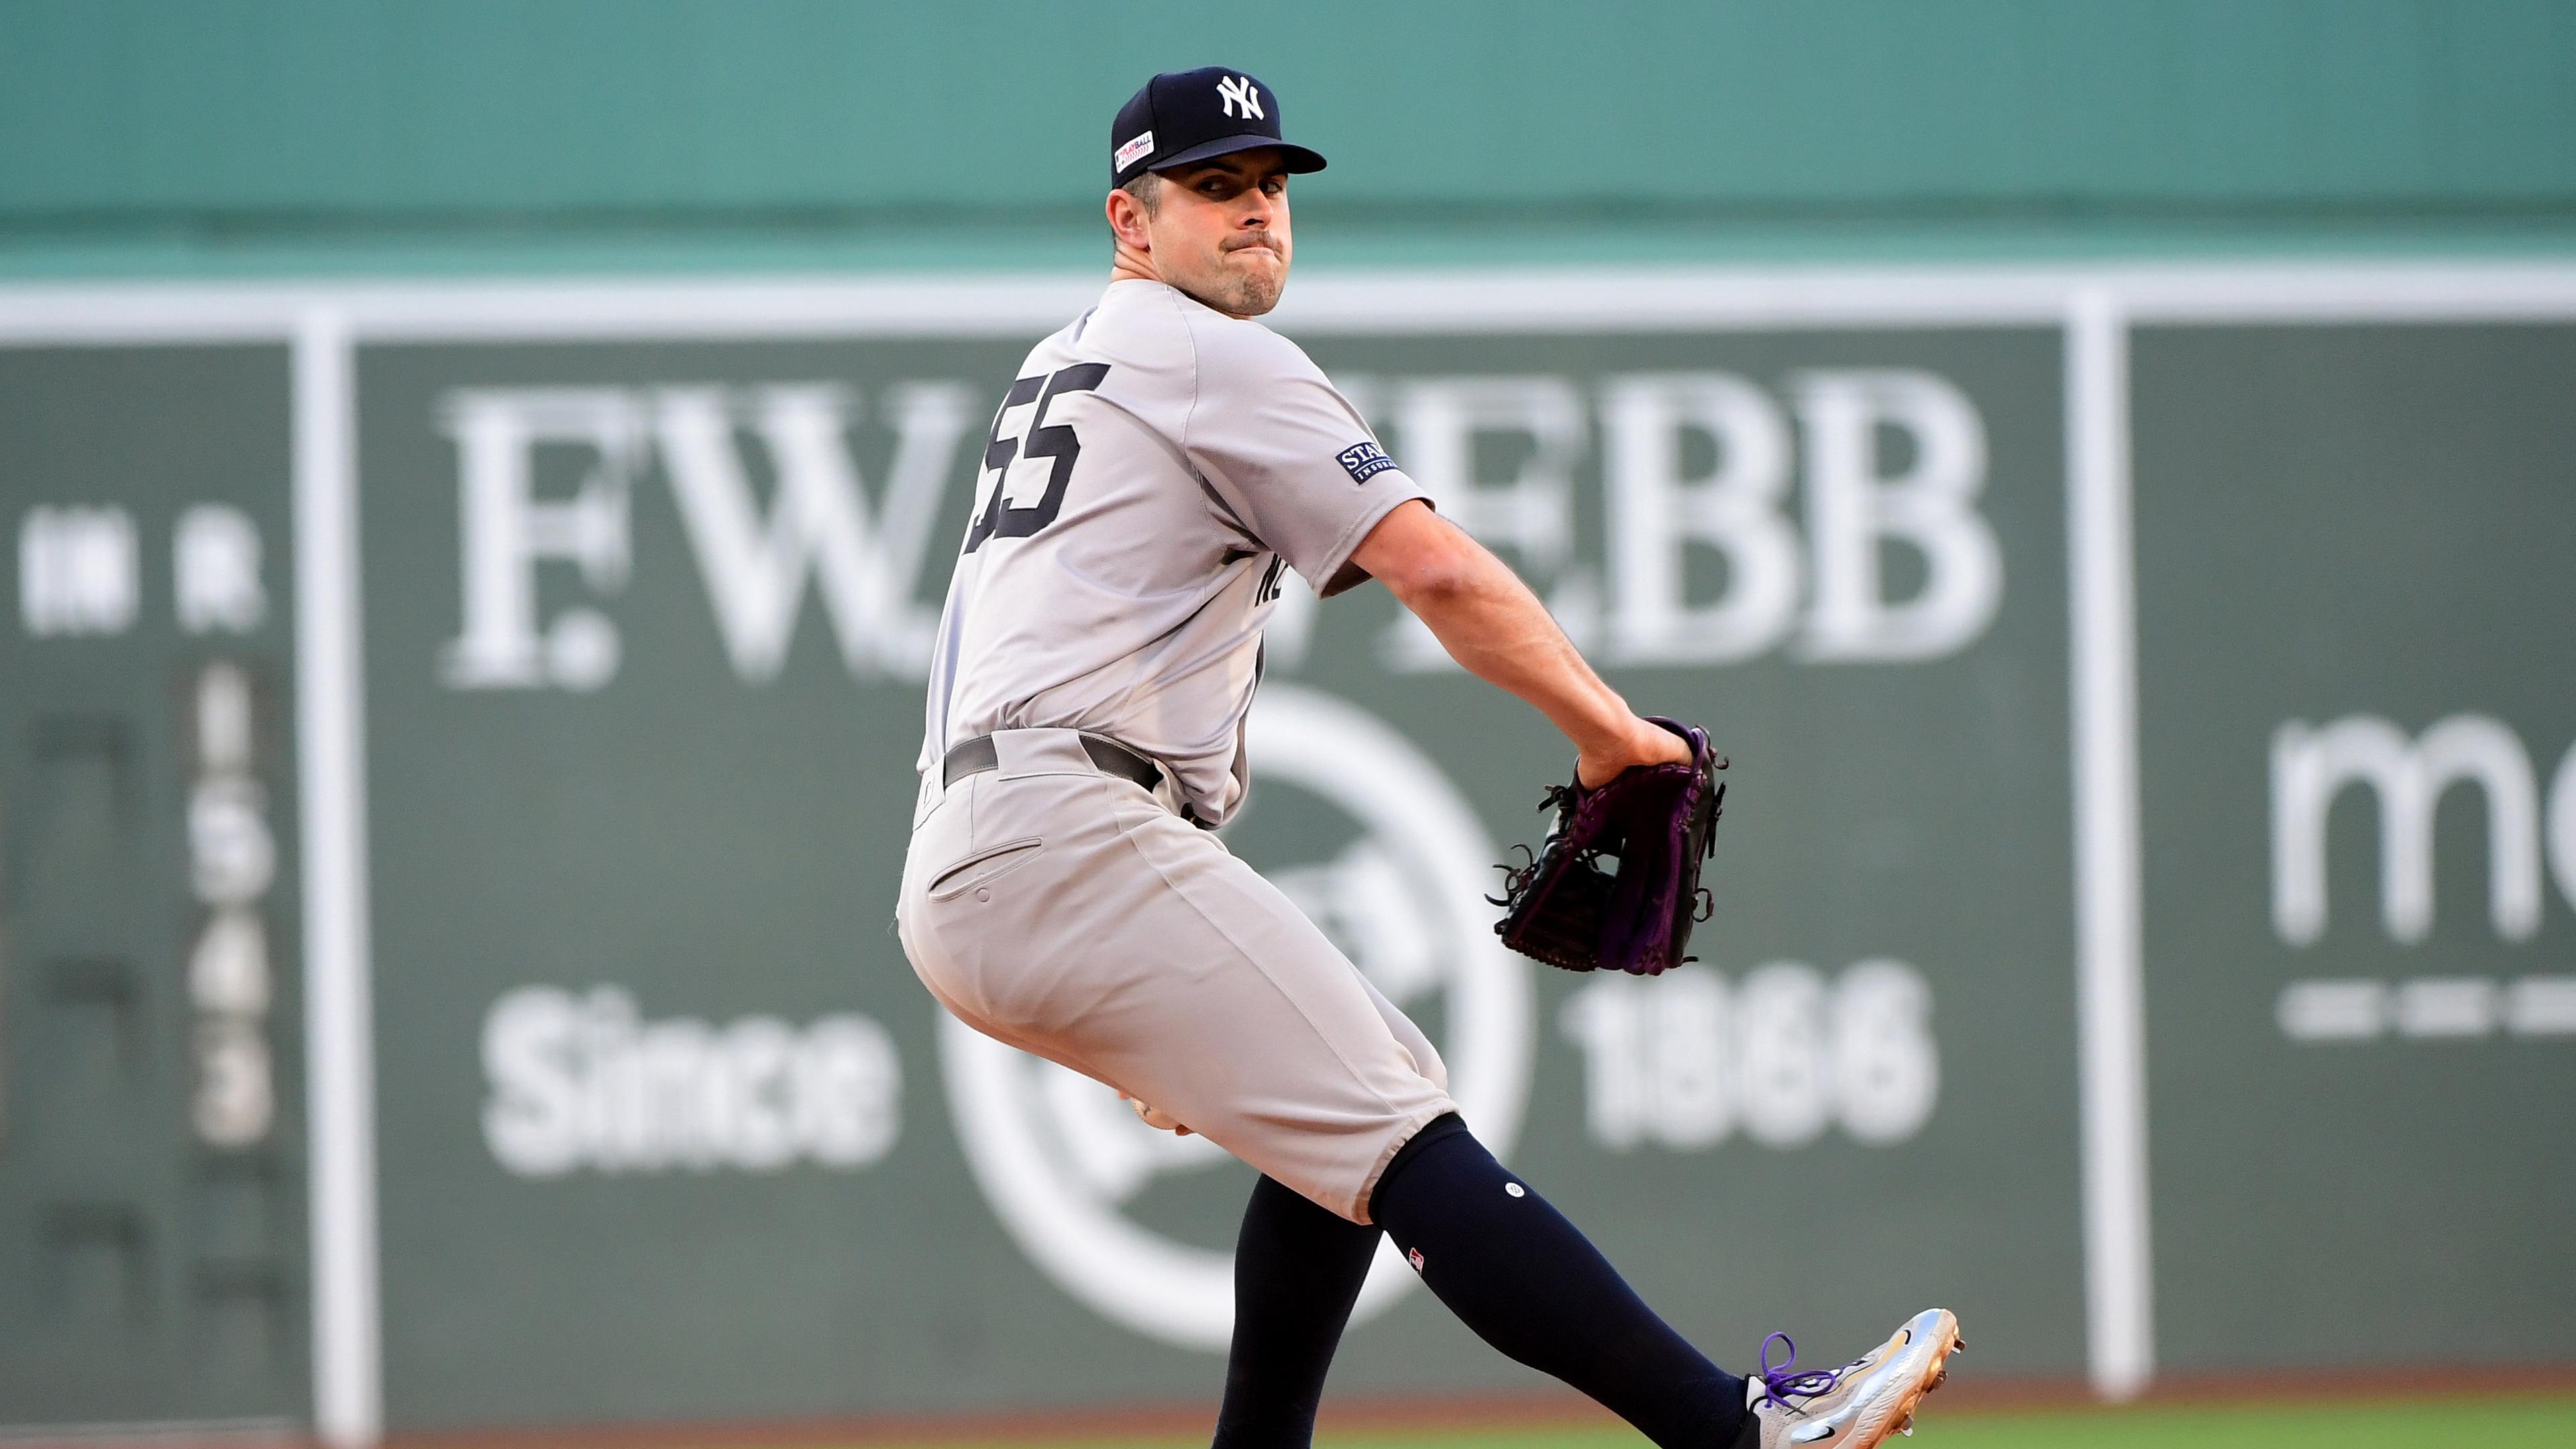 New York Yankees starting pitcher Carlos Rodon (55) pitches during the first inning against the Boston Red Sox at Fenway Park. / Bob DeChiara-USA TODAY Sports